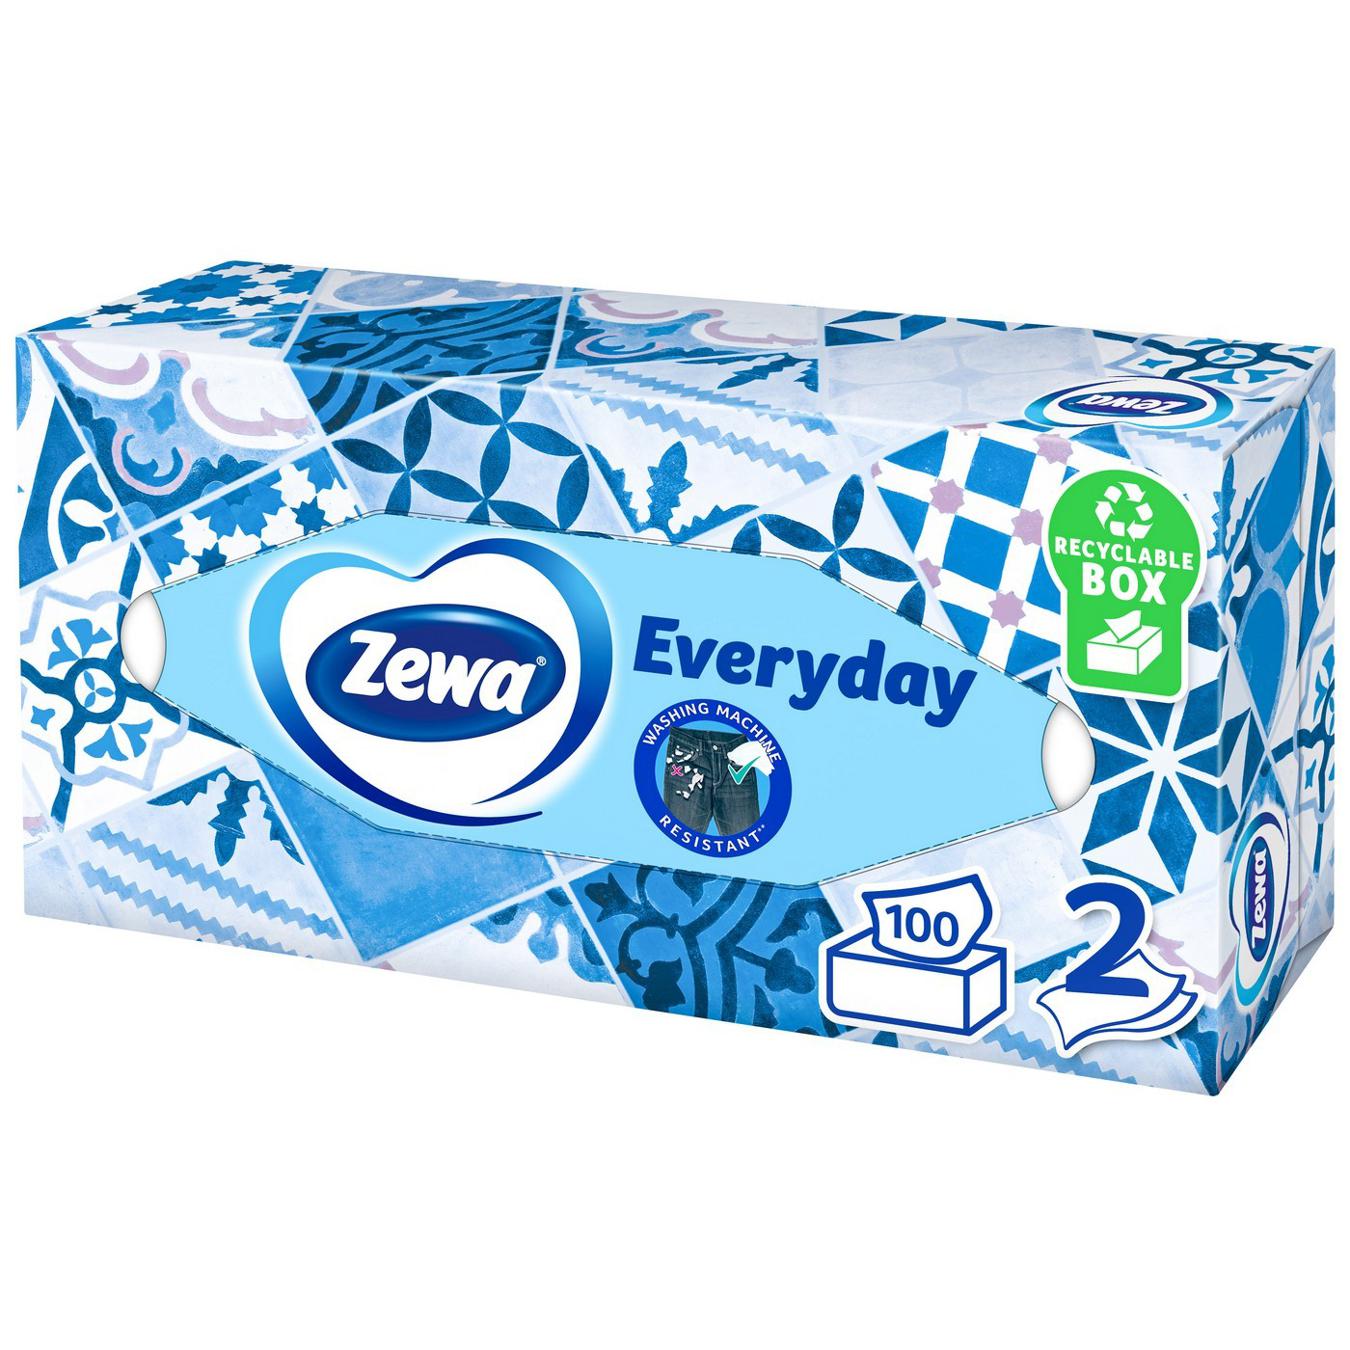 Zewa Everyday Cosmetic Two-Ply Paper Napkins 100 pcs 5